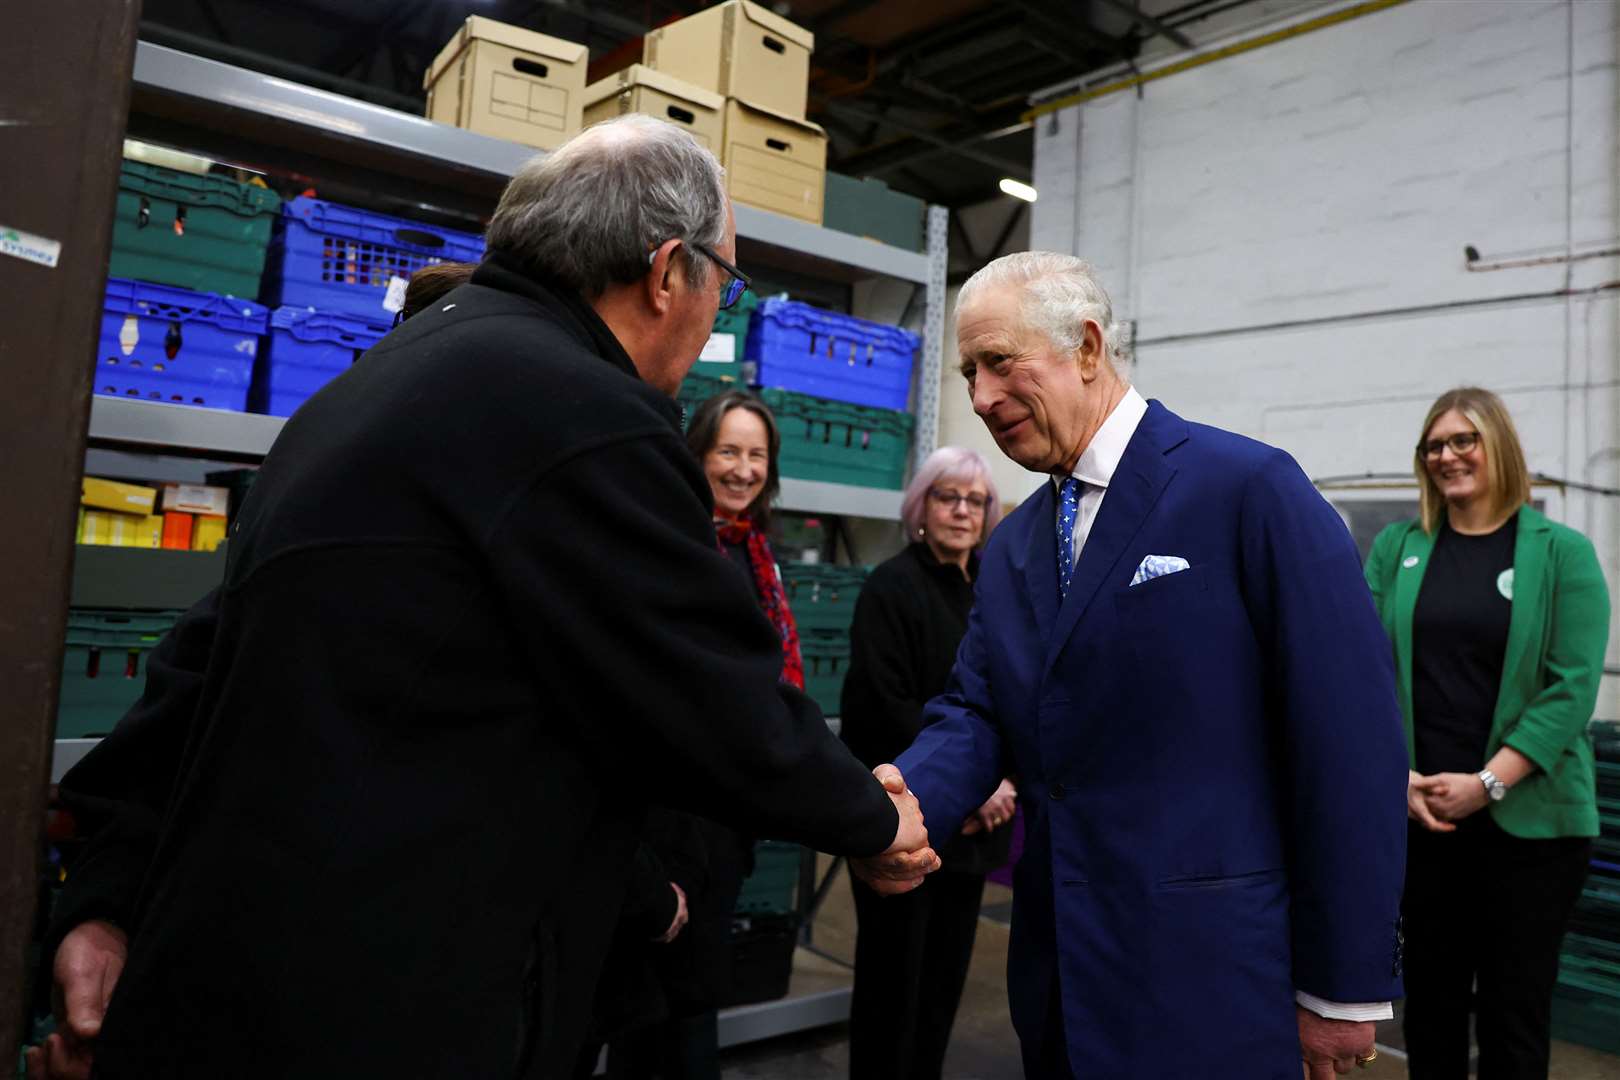 The King speaks with volunteers during a visit to the Milton Keynes food bank (Molly Darlington/PA Wire)